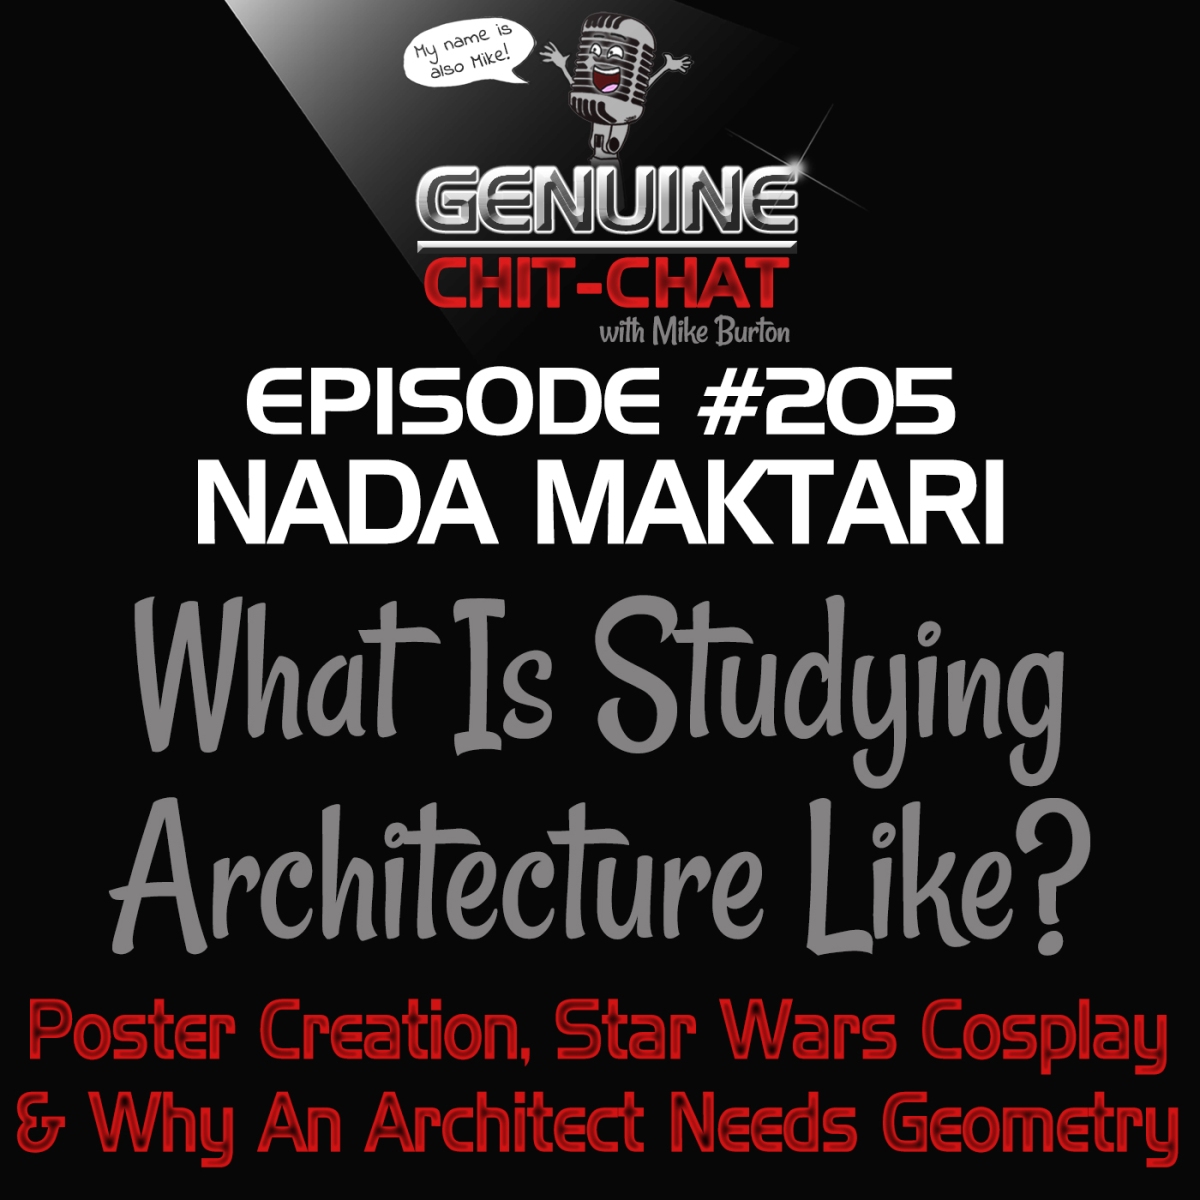 #205 – What Is Studying Architecture Like? Poster Creation, Star Wars Cosplay & Why An Architect Needs Geometry With Nada Maktari